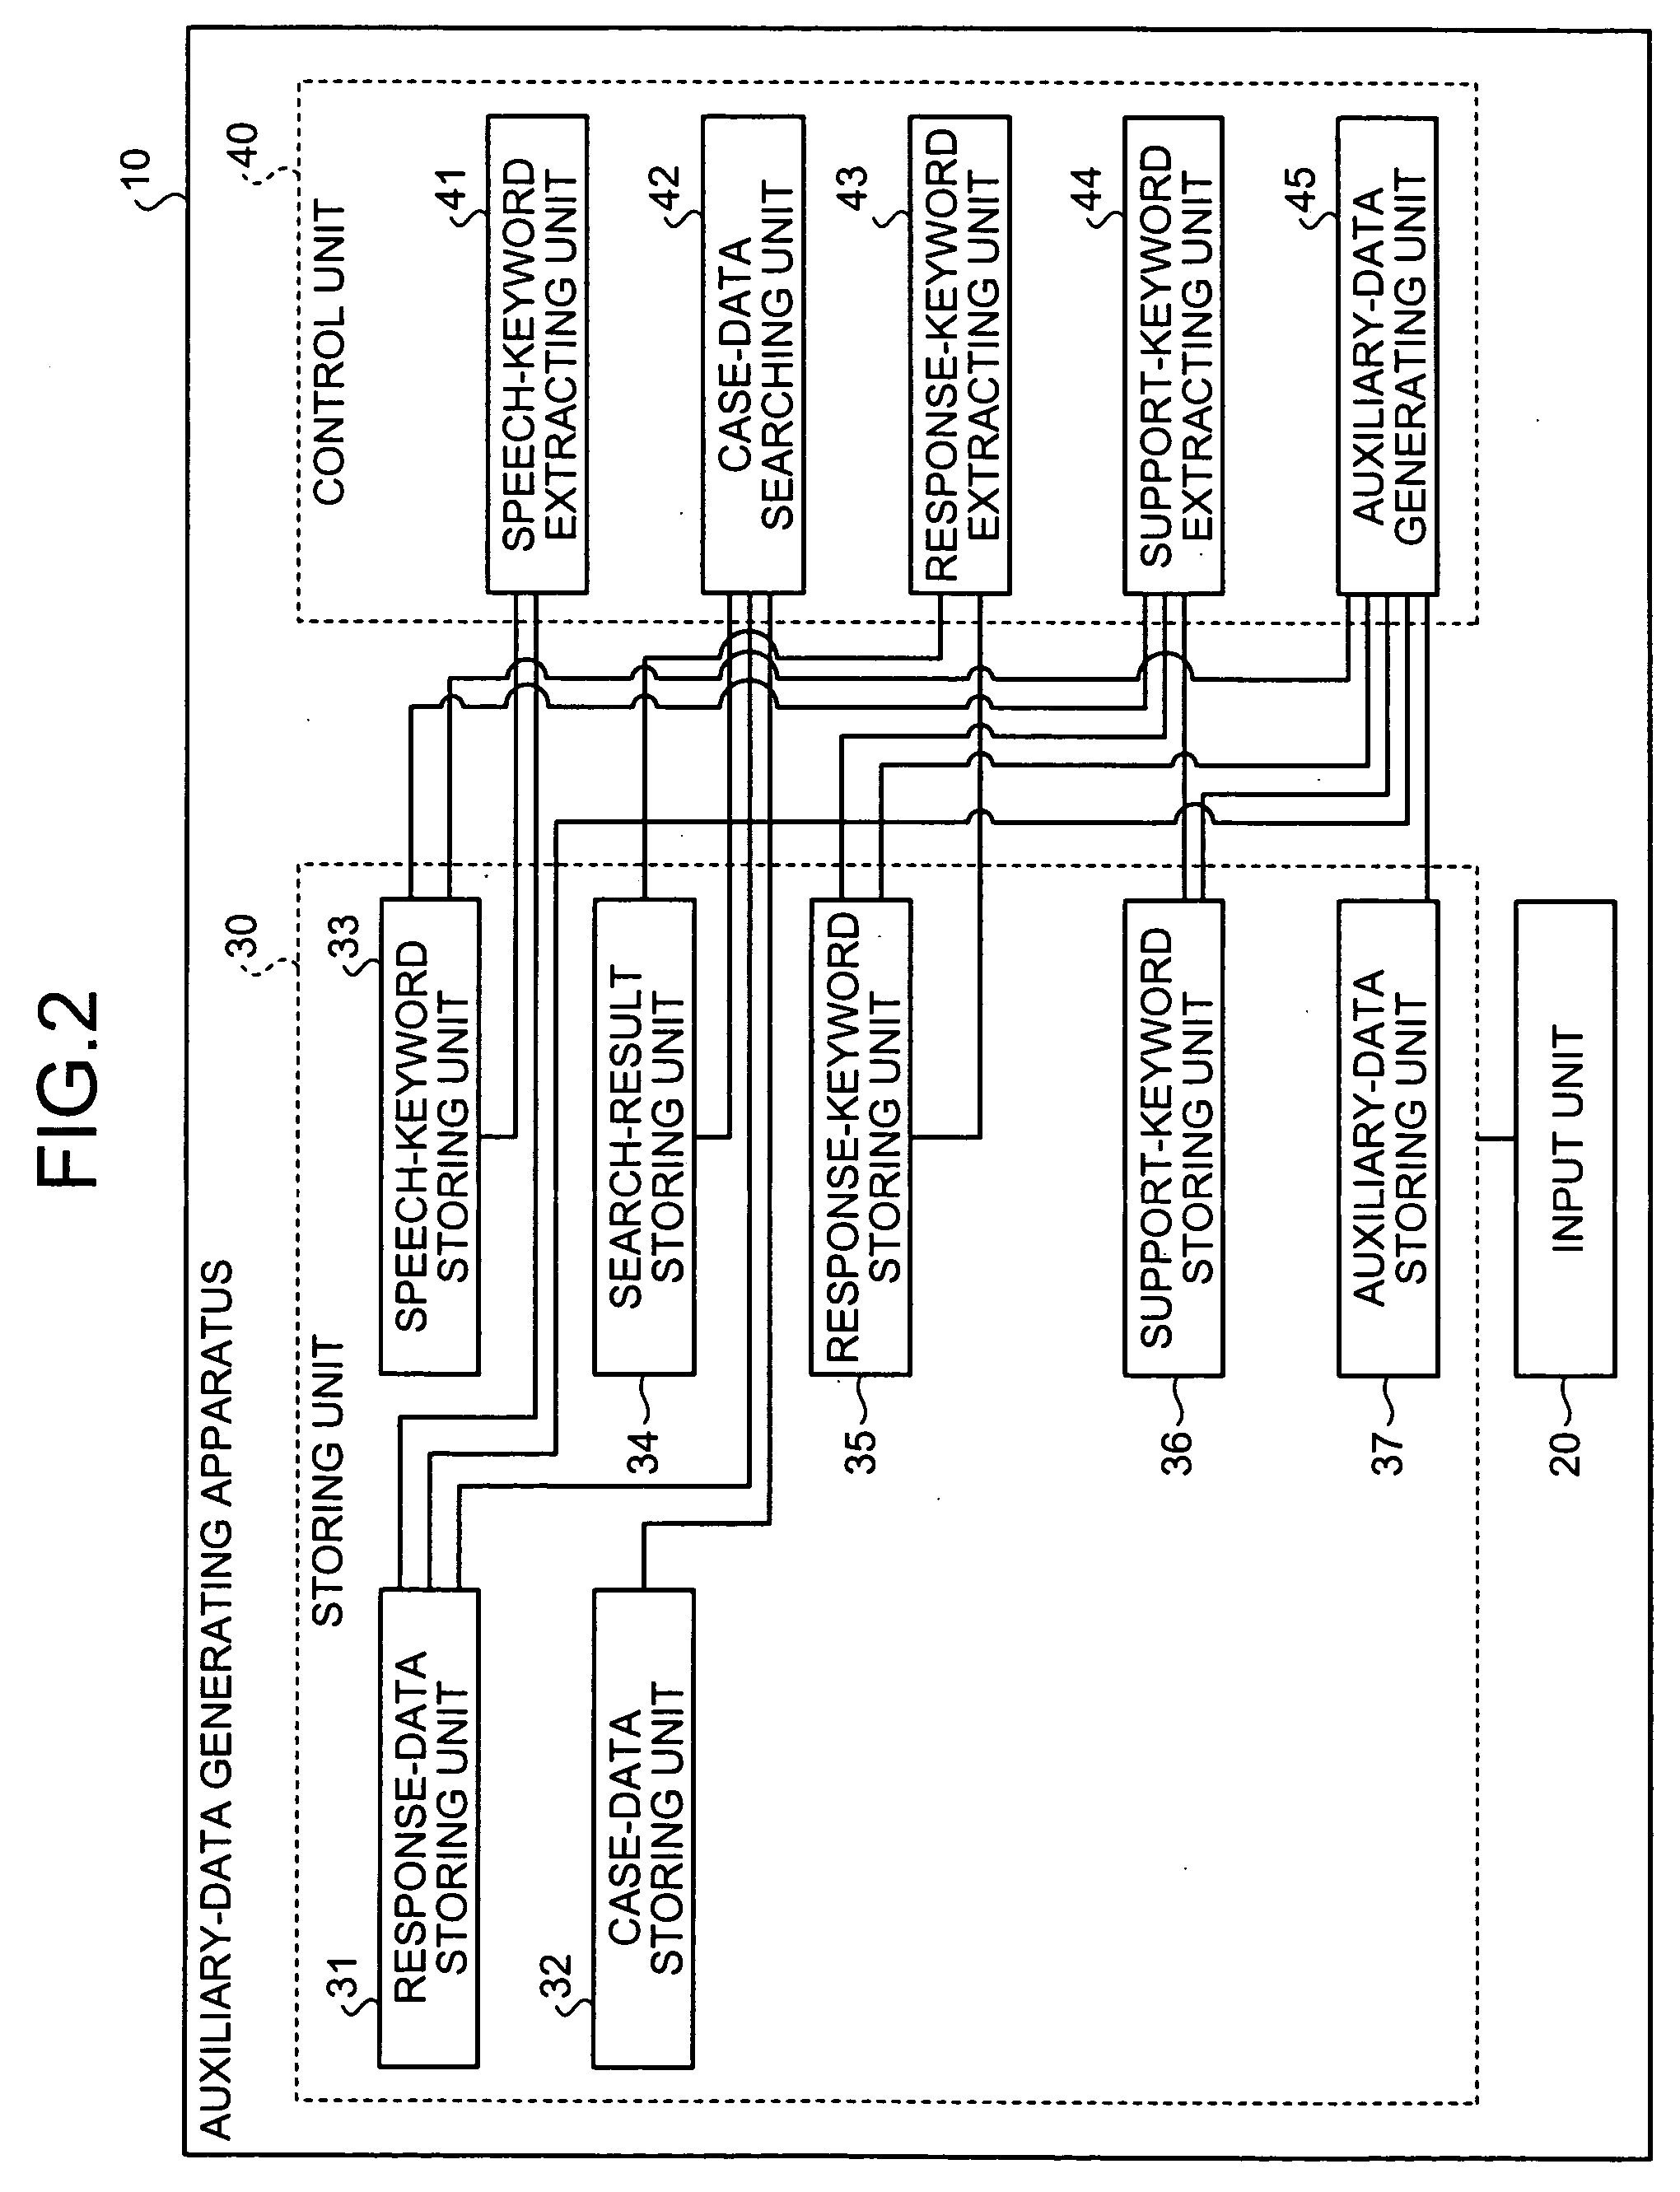 Computer product, operator supporting apparatus, and operator supporting method